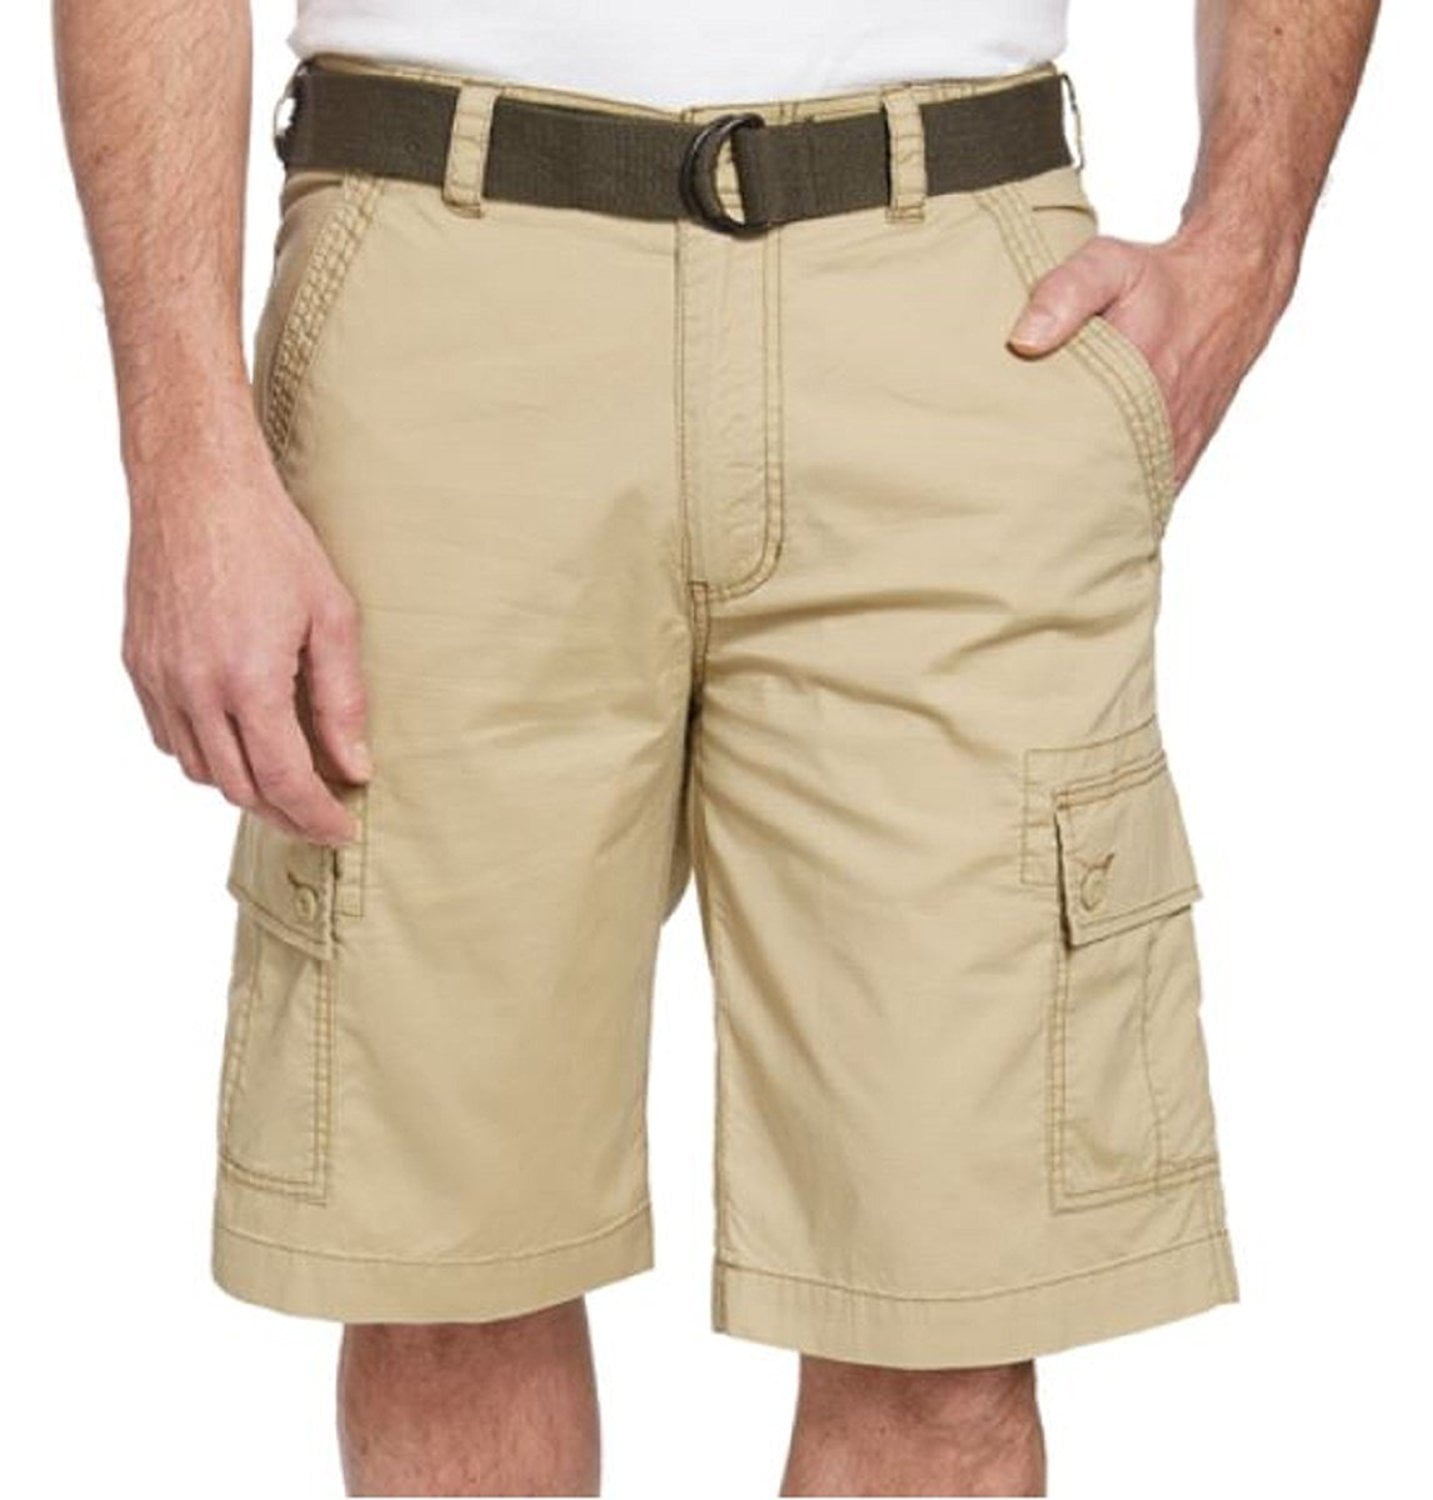 Wearfirst 685 Legacy Cargo Short 6 Pocket with Belt 